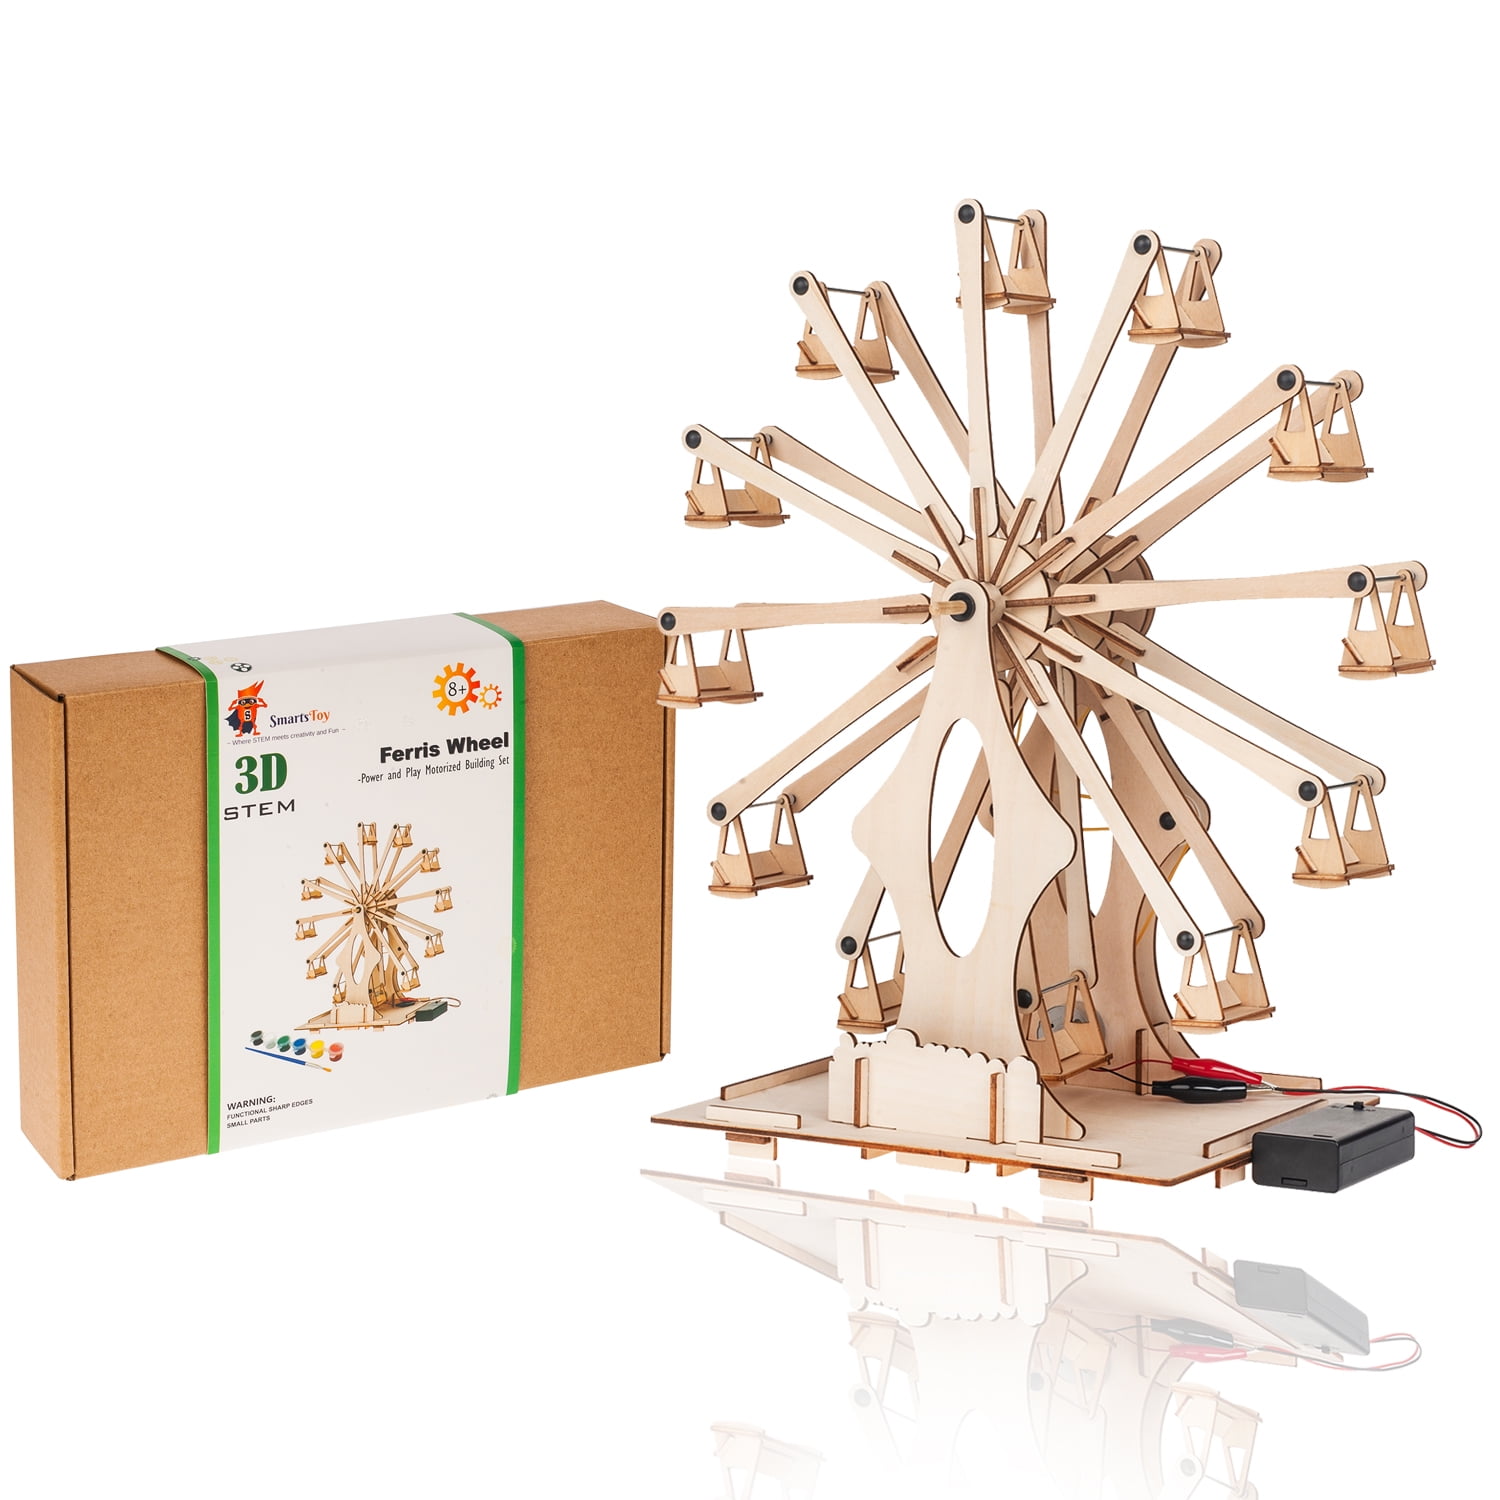 Wooden Ferris Wheel Building DIY Model Kits for Adults, Teens and Kids |  Educational STEM Toys for Boys and Girls | 3D Puzzles Science Kits for Kids  